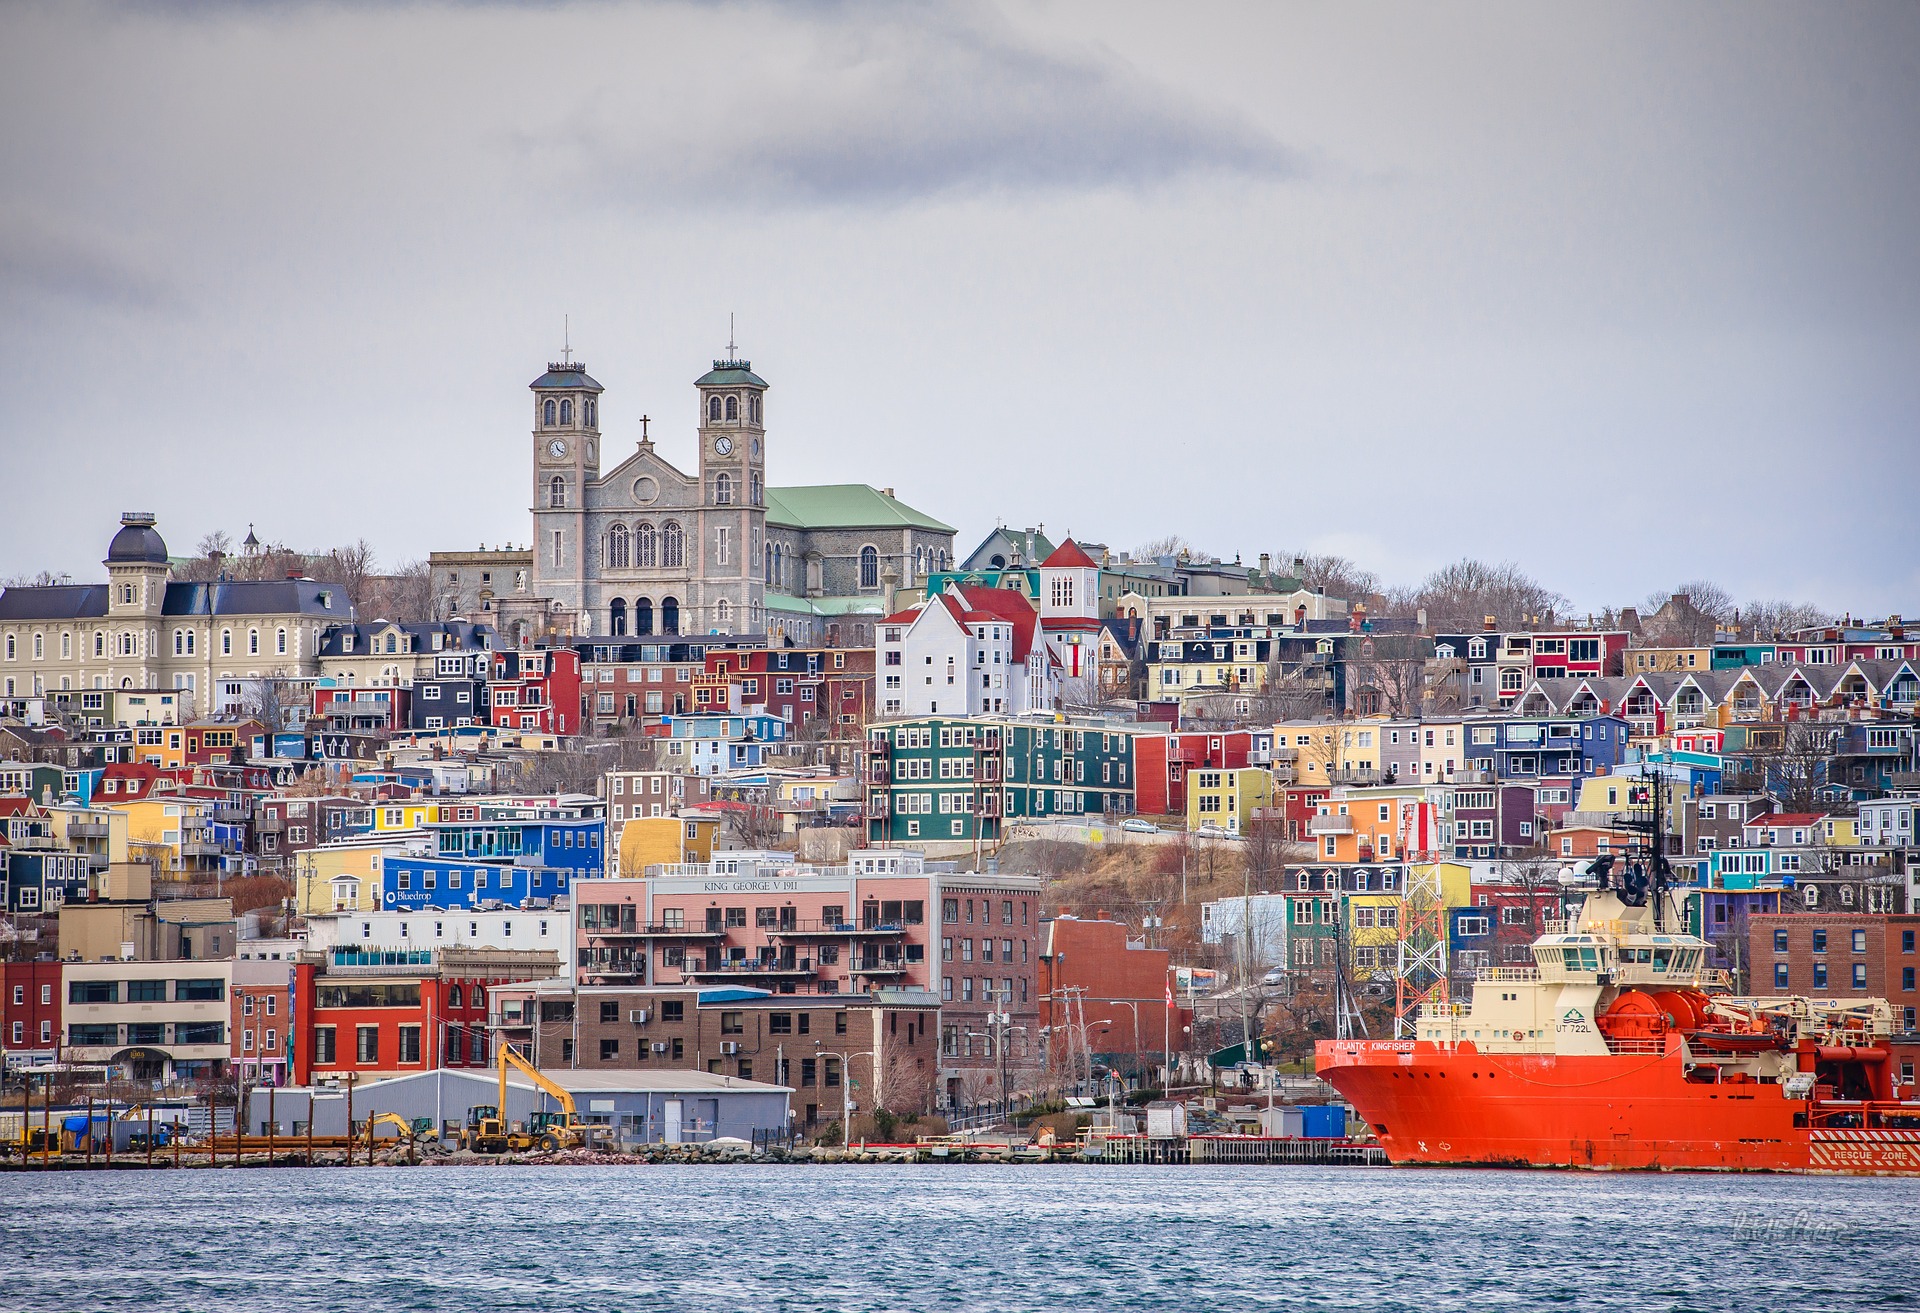 Colourful downtown St Johns, Newfoundland